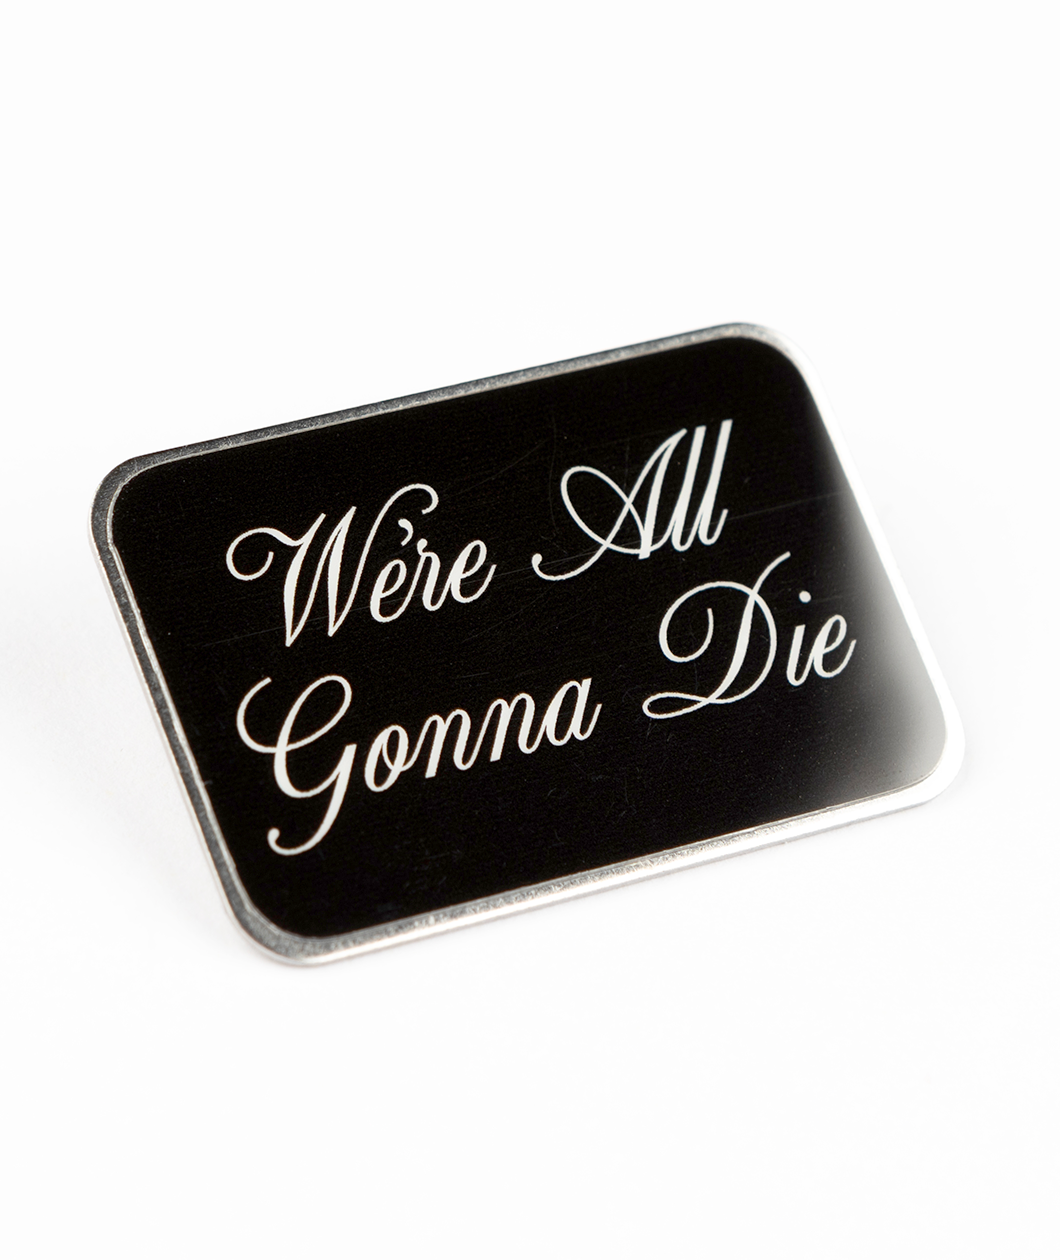 Silver plated pin with digitally printed text, "We're All Gonna Die"